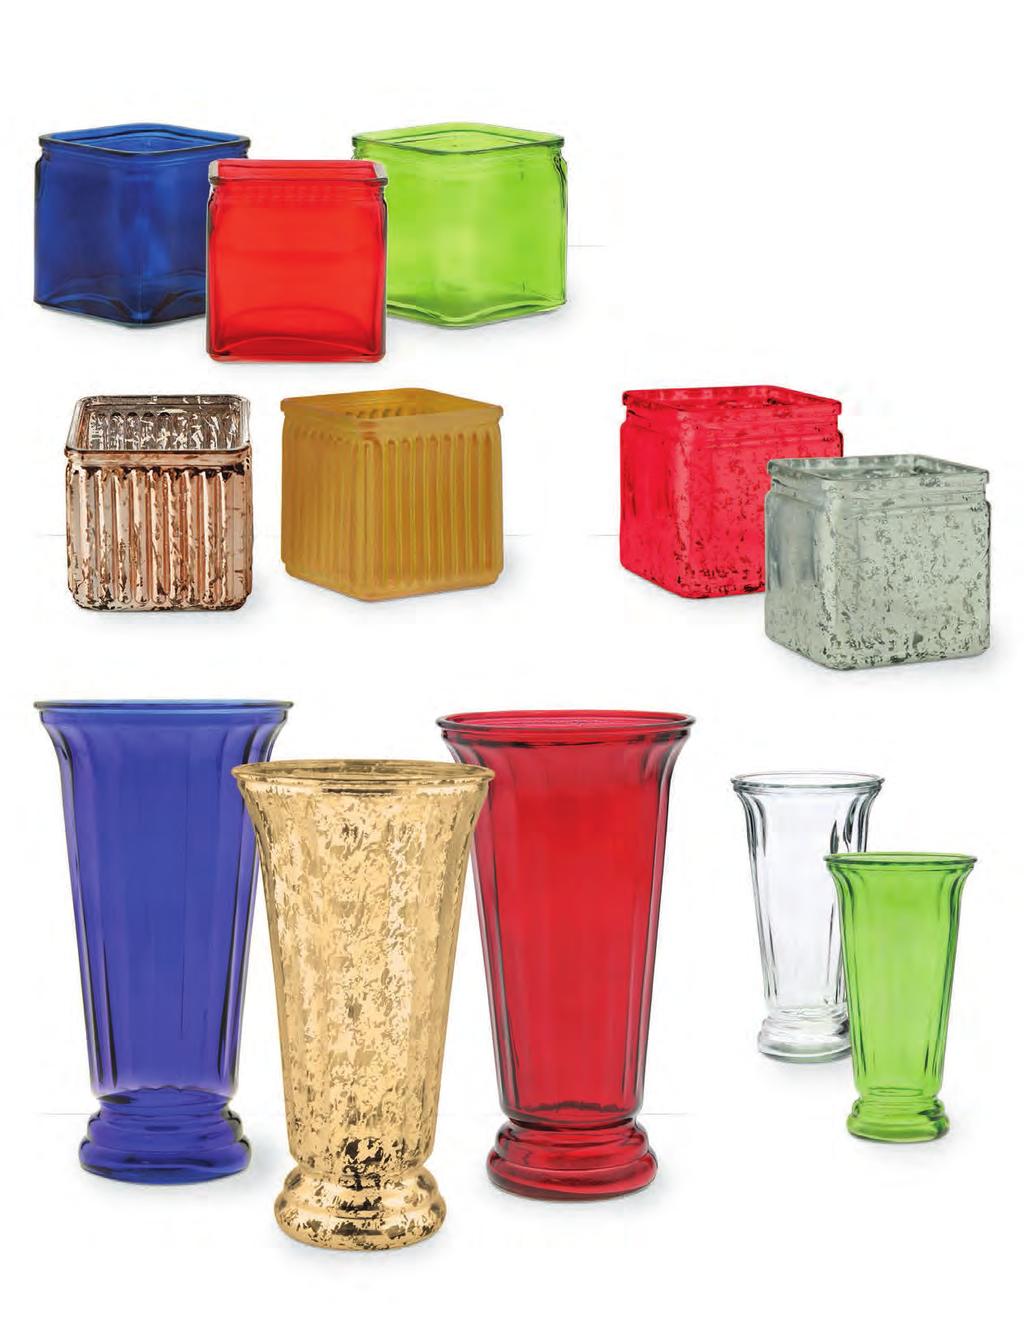 Ribbed and Smooth-Sided Glass Cubes 4.5 x 4.75 Tall GQ2-PURPLE 12/$2.69 ea. GQ2-COLBALT 12/$2.69 ea. GQ2-RED 12/$2.69 ea. GQ2-MOSS 12/$2.